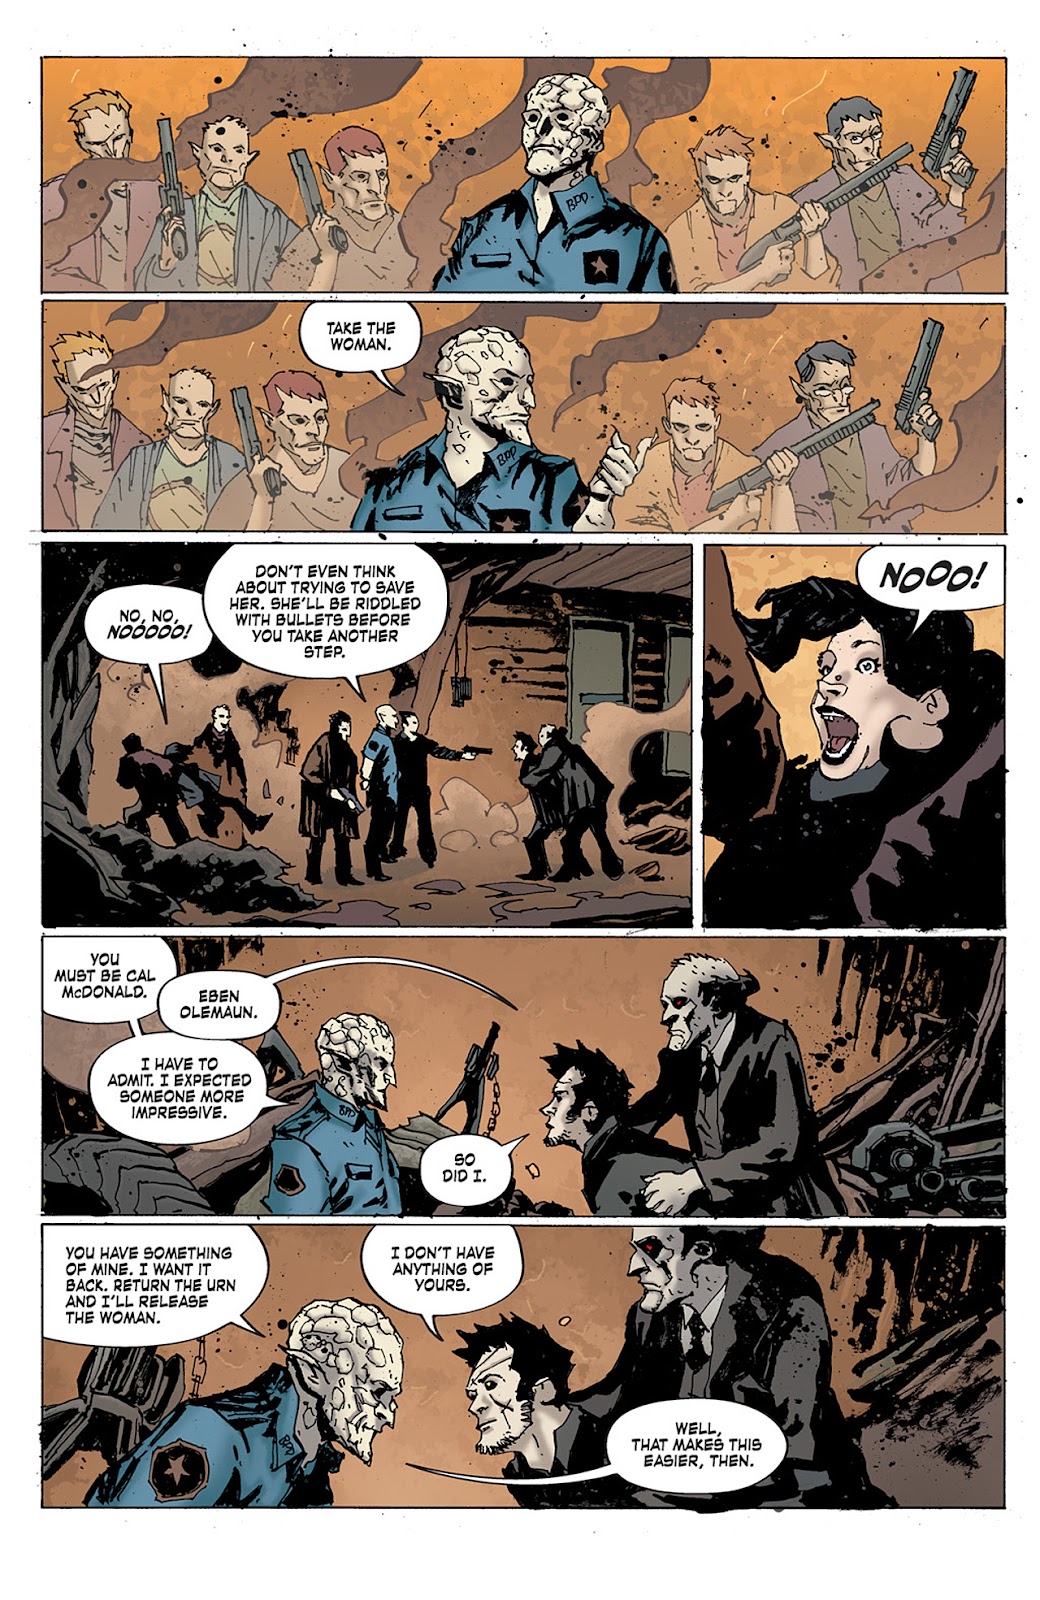 Criminal Macabre: Final Night - The 30 Days of Night Crossover issue 3 - Page 17